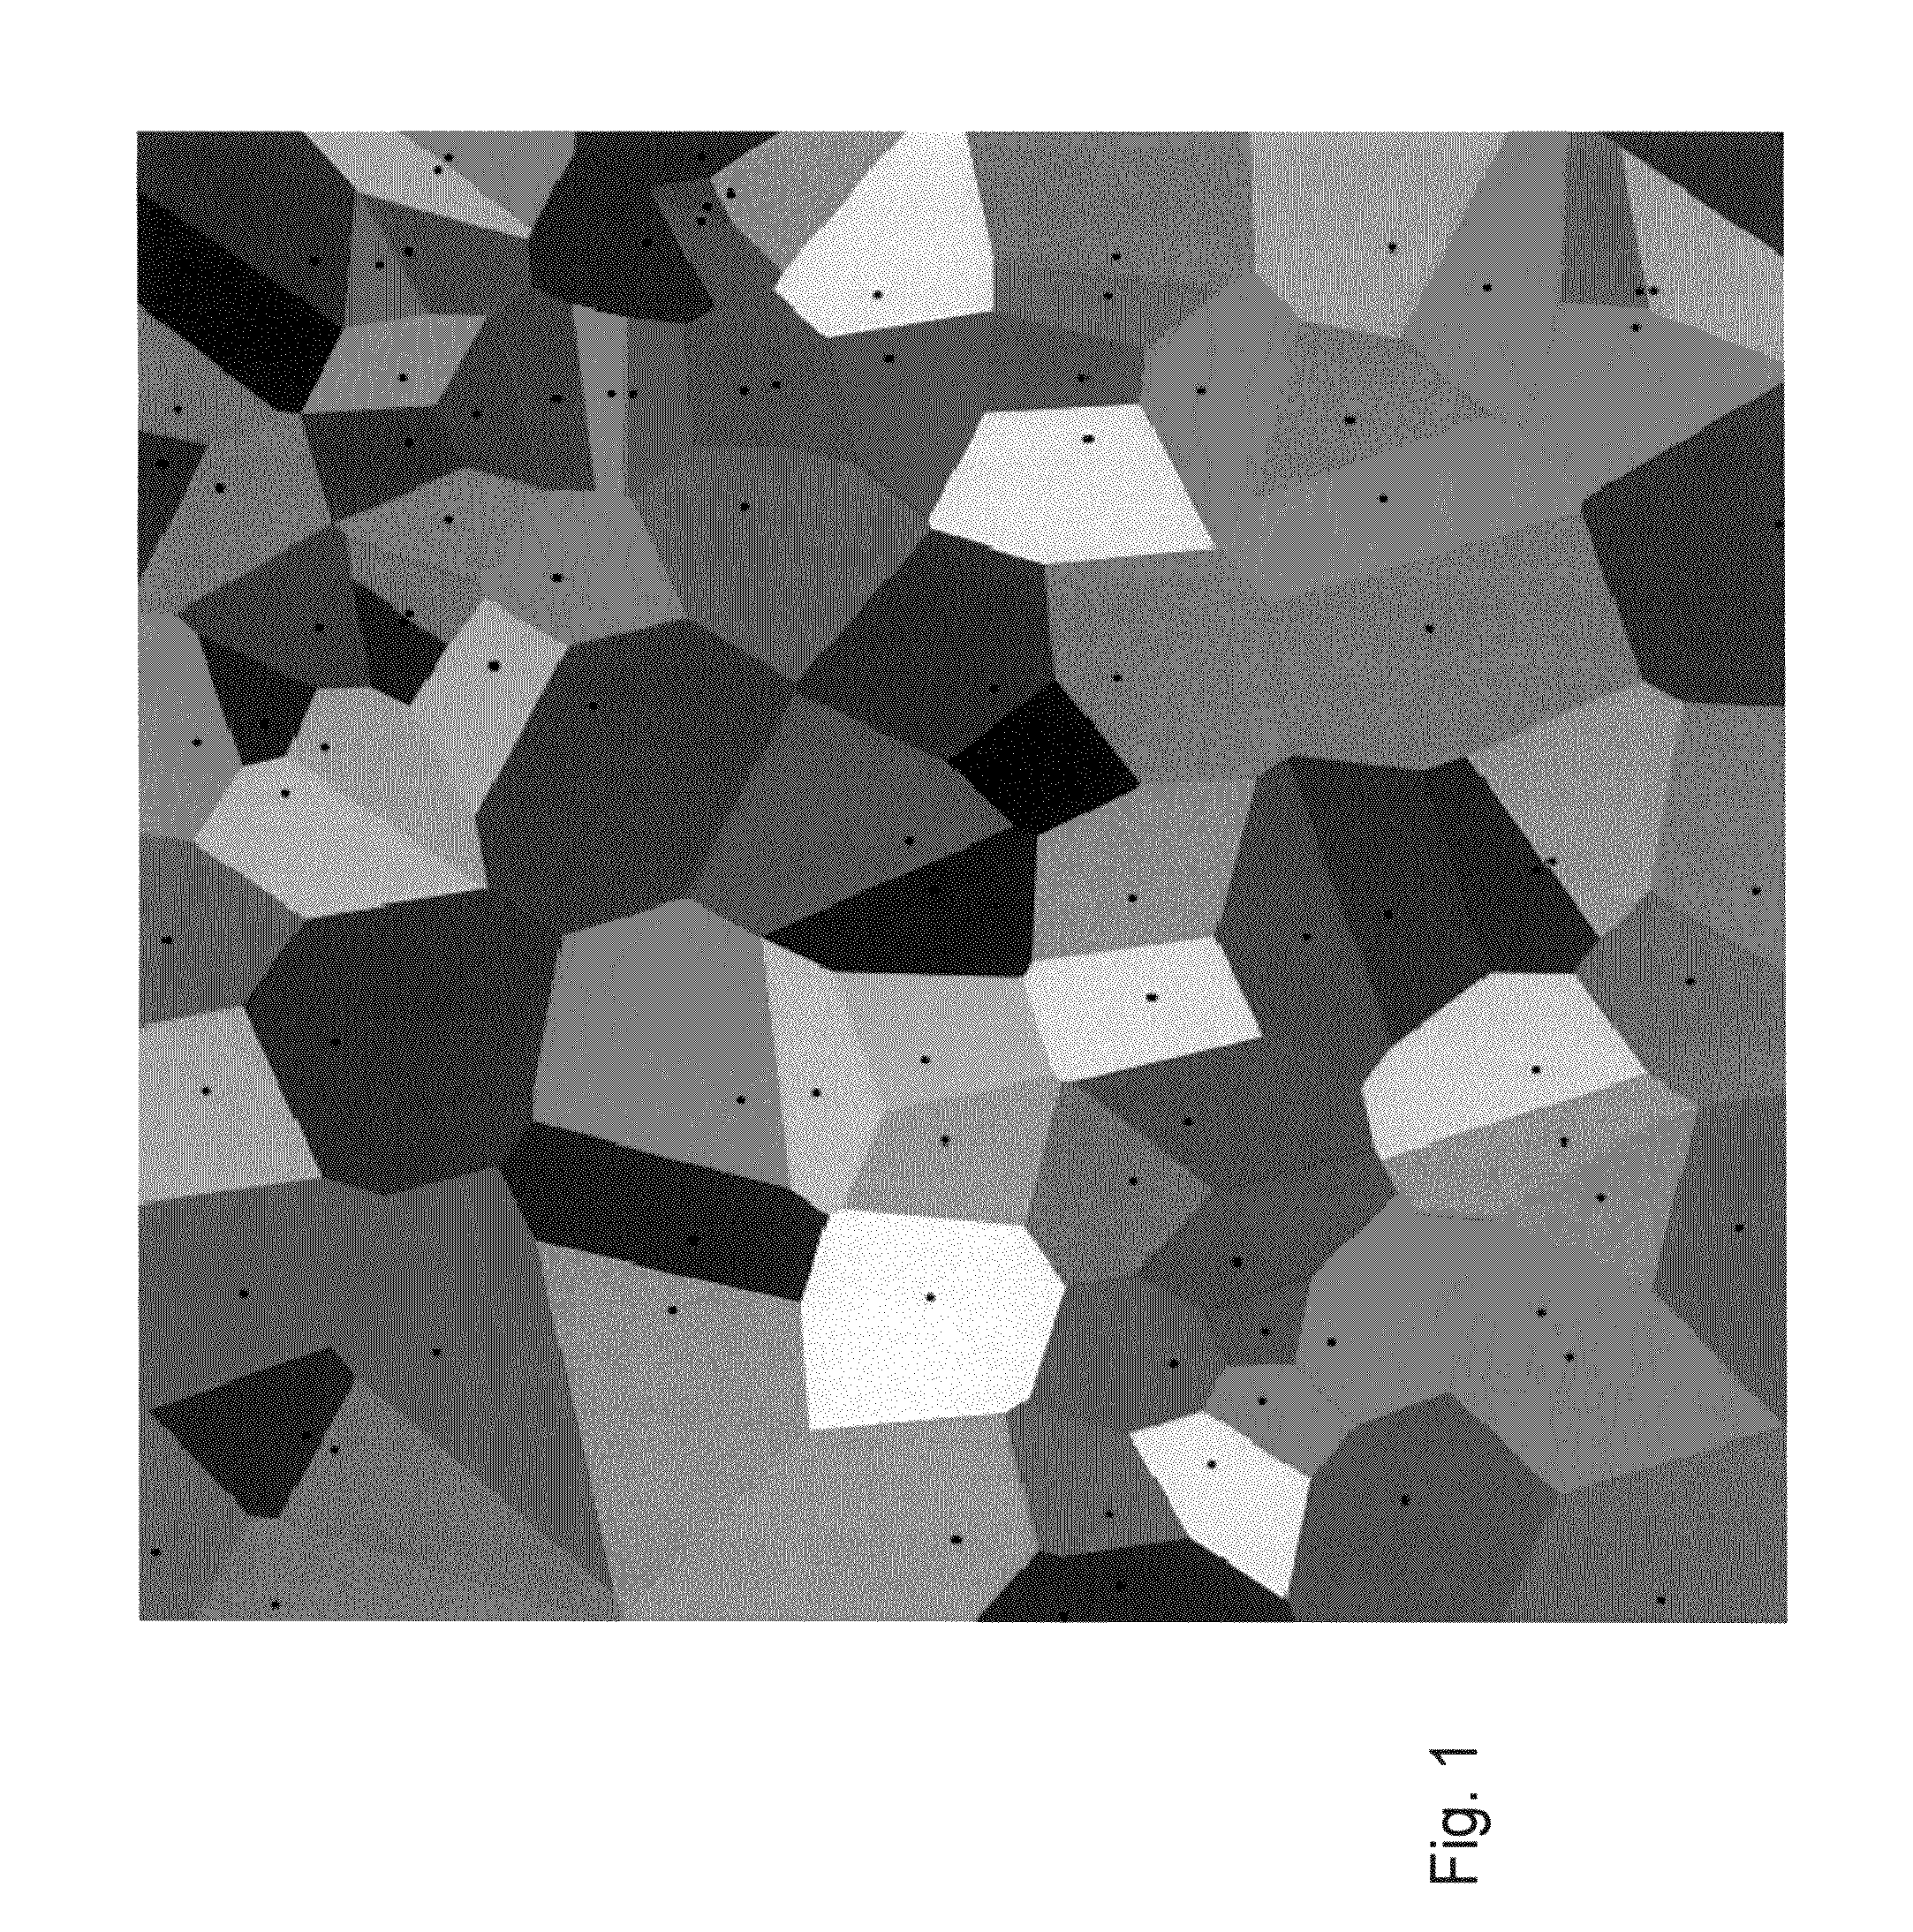 Efficient computation of Voronoi diagrams of general generators in general spaces and uses thereof